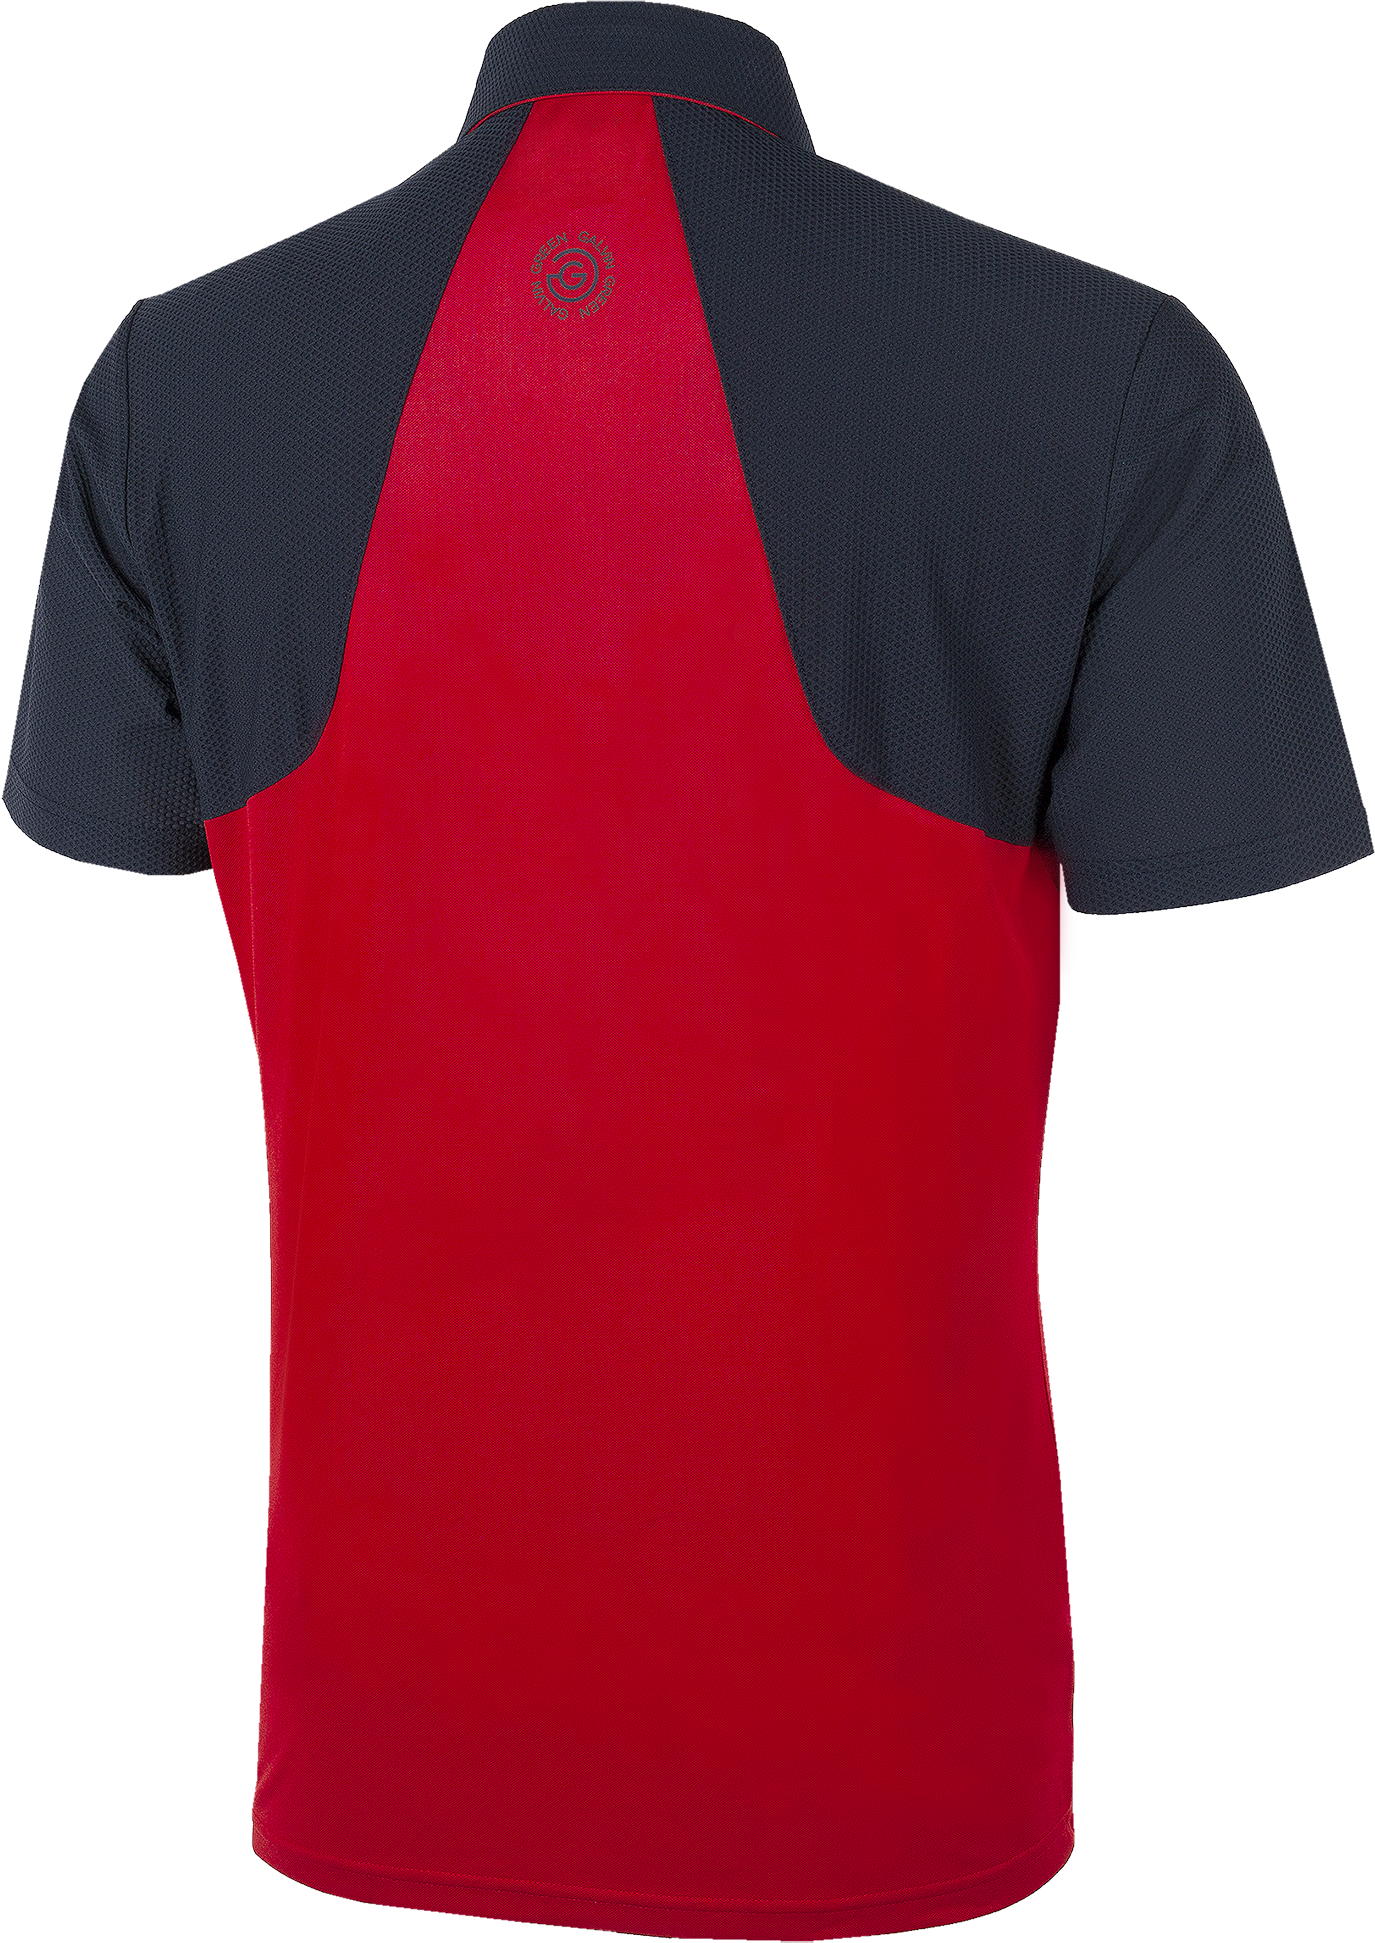 Galvin Green Massimo Ventils Plus Polo, red/navy